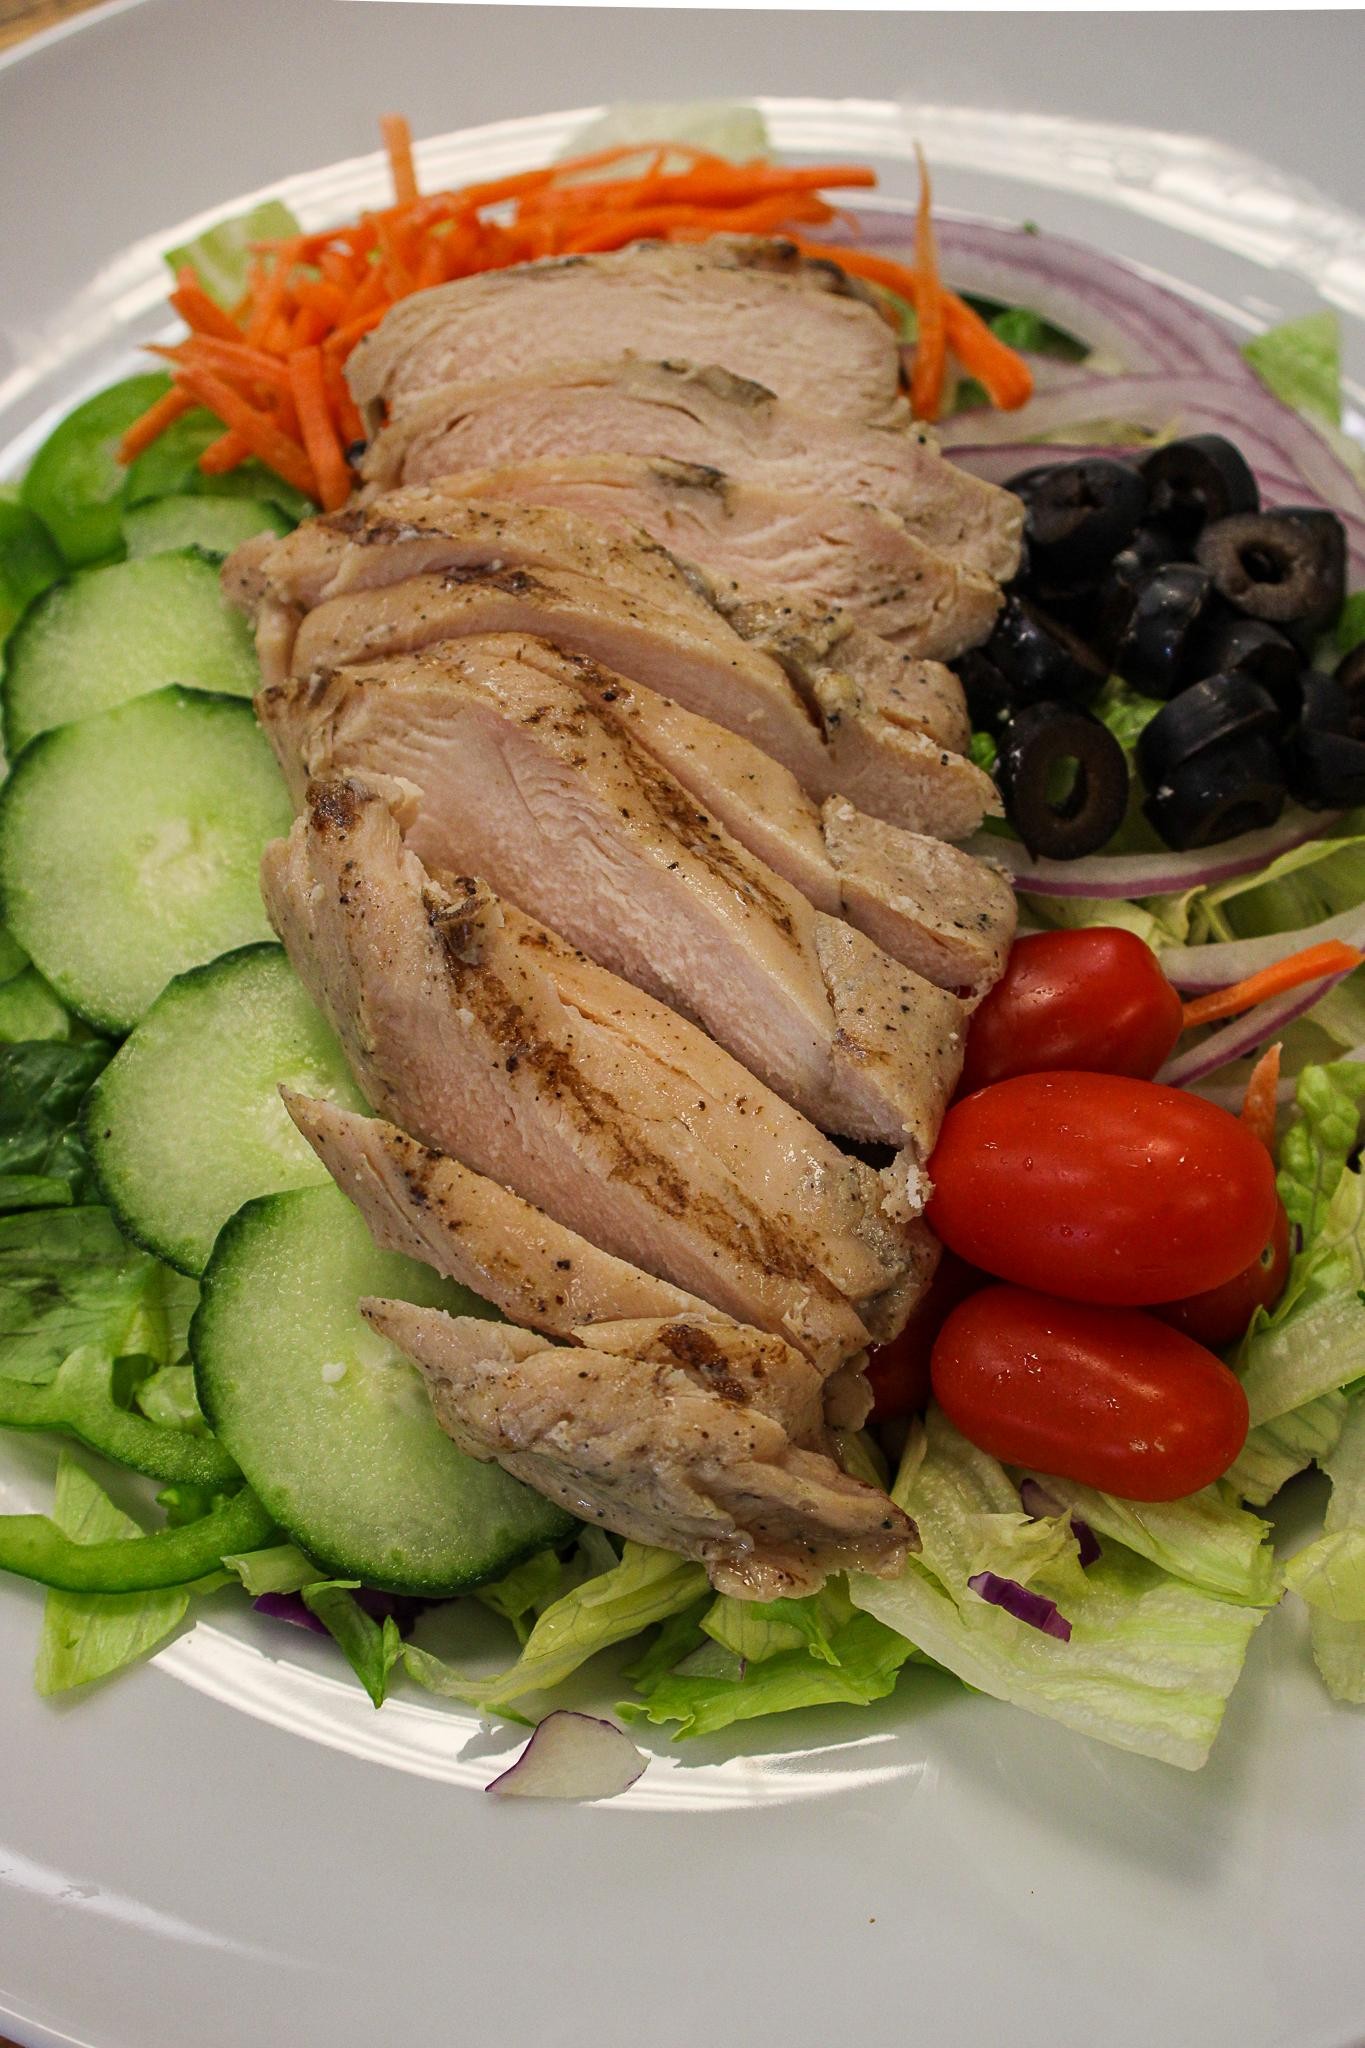 Tossed salad with grilled chicken